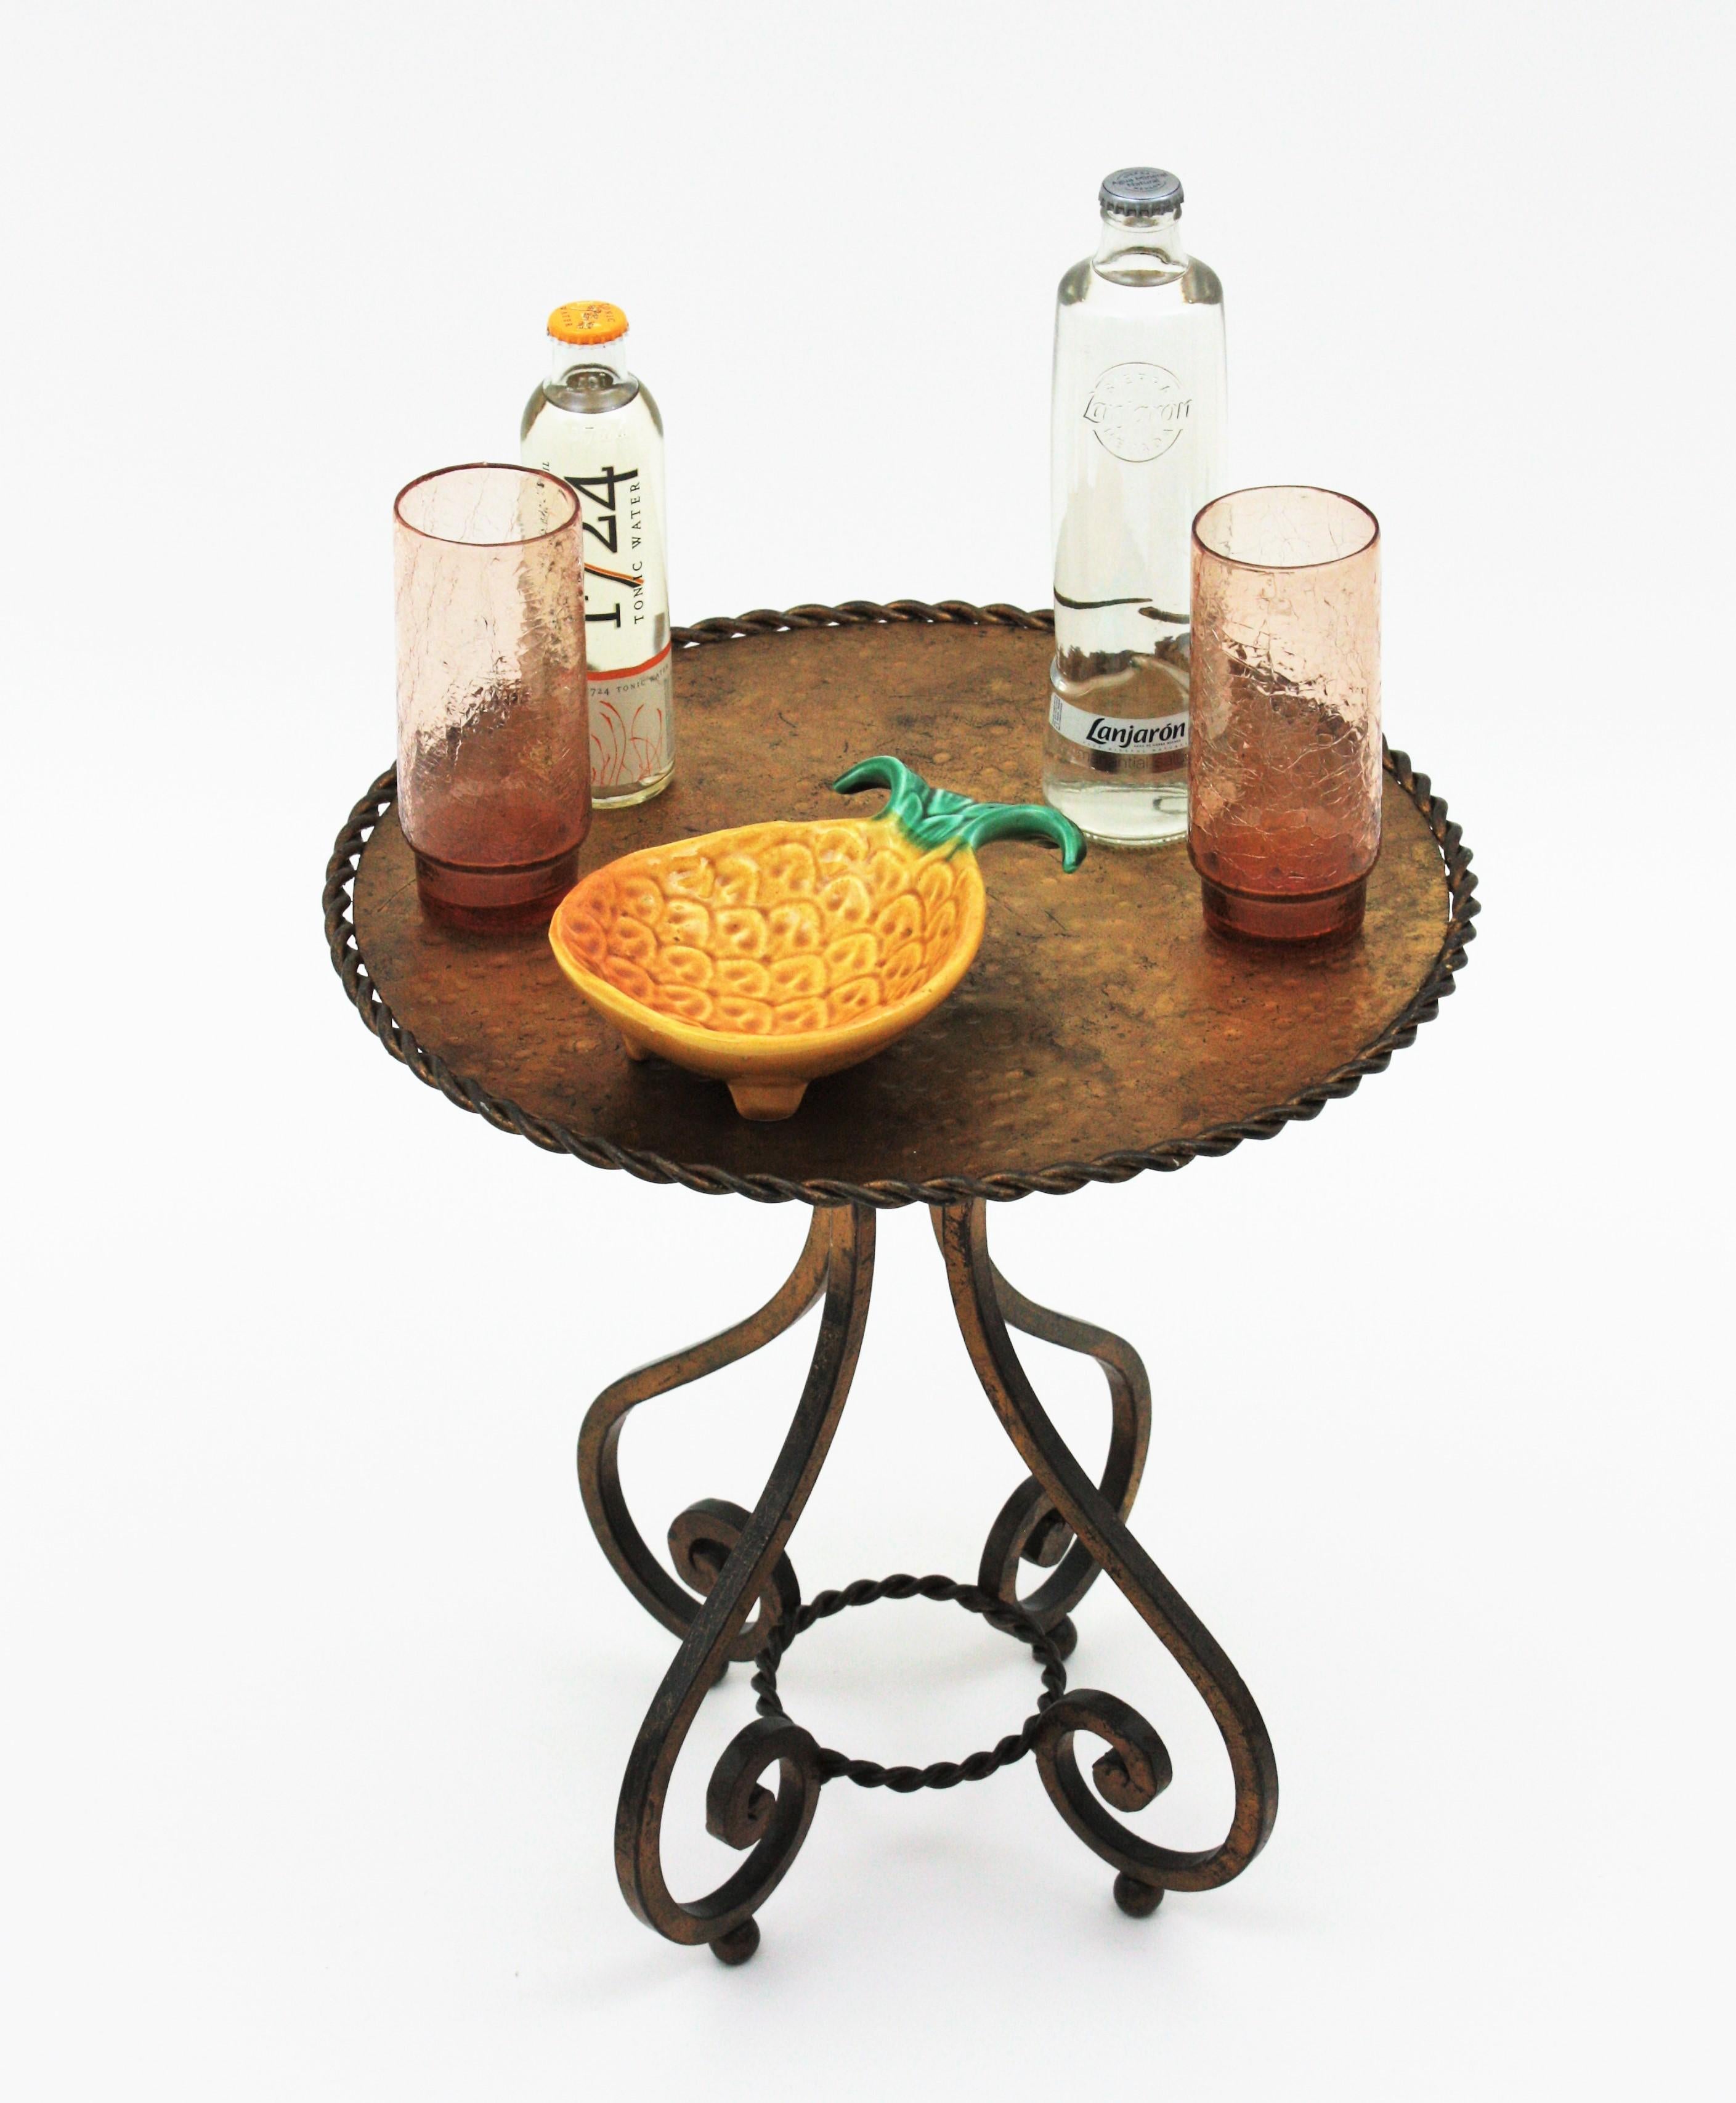 Elegant wrought gilt iron low round coffee table or occassional table drinks table. Spain, 1920s
This drink table stands up on four scrolled legs supported on iron balls . The top is heavily adorned by the Hammer marks and it has braided iron rope